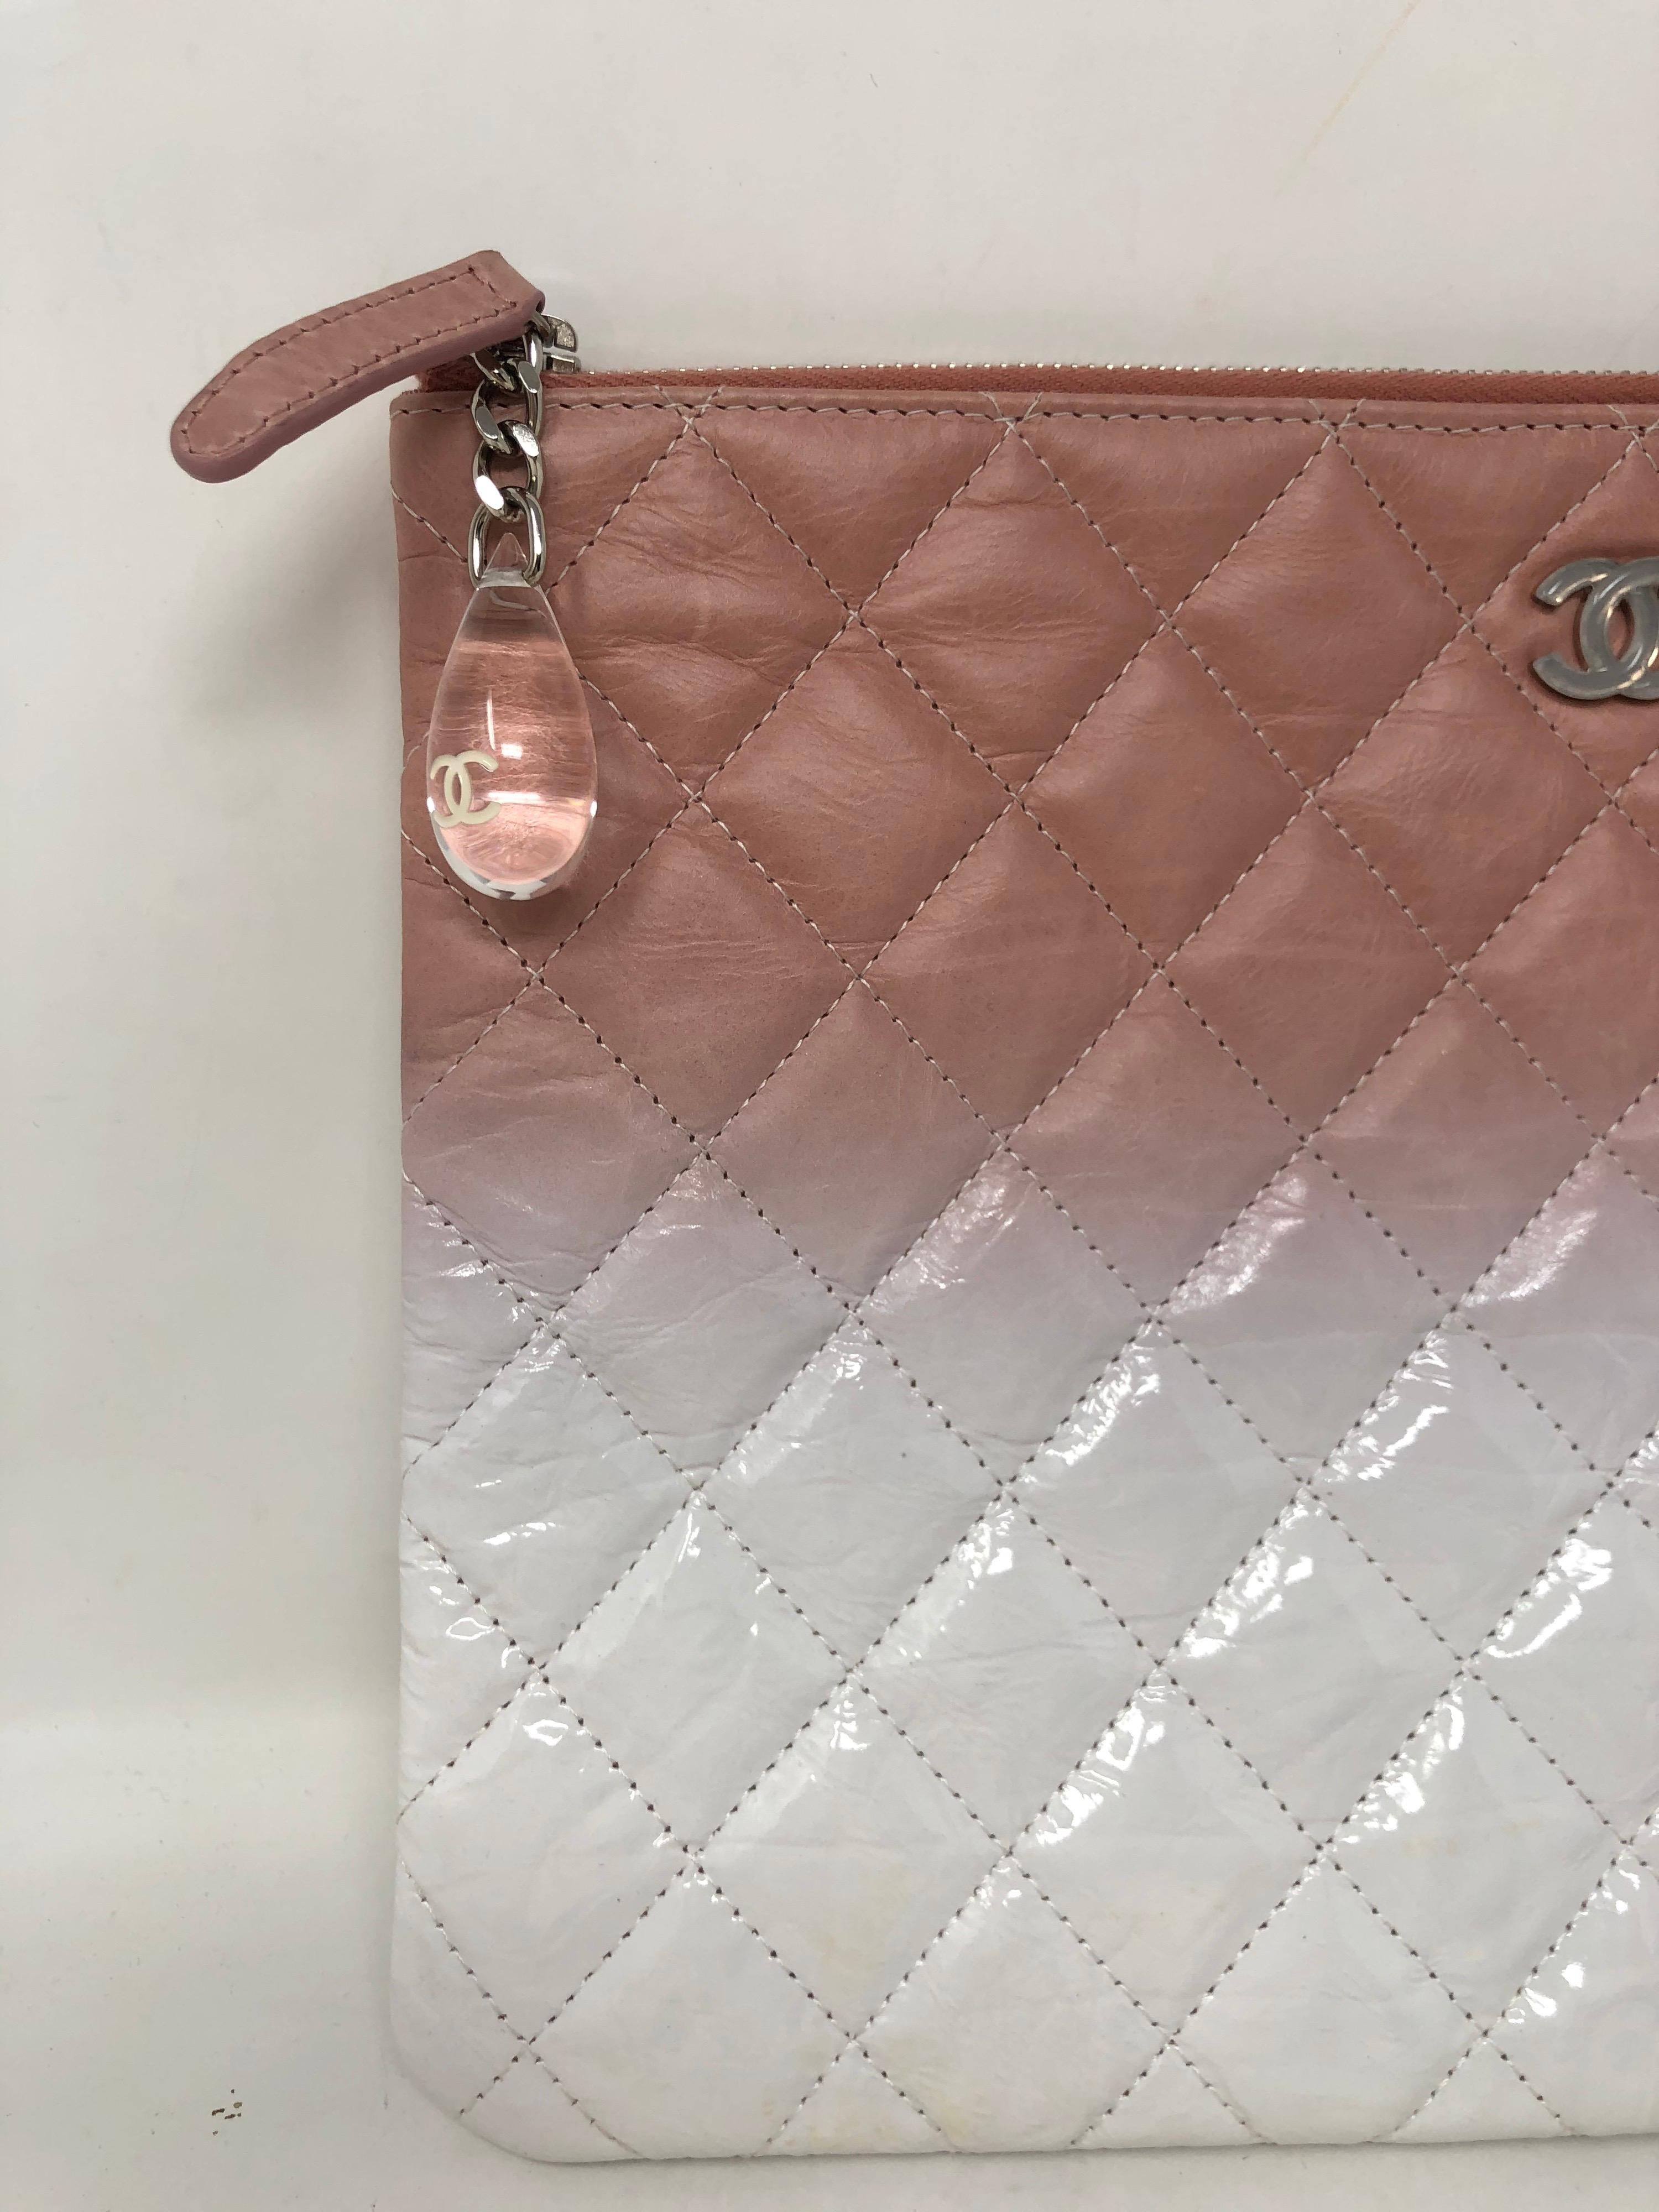 Chanel Ombre Pink and white clutch. Beautiful graduated color clutch. Mint like new condition. Lucite pull. Includes authenticity card. Guaranteed authentic. 